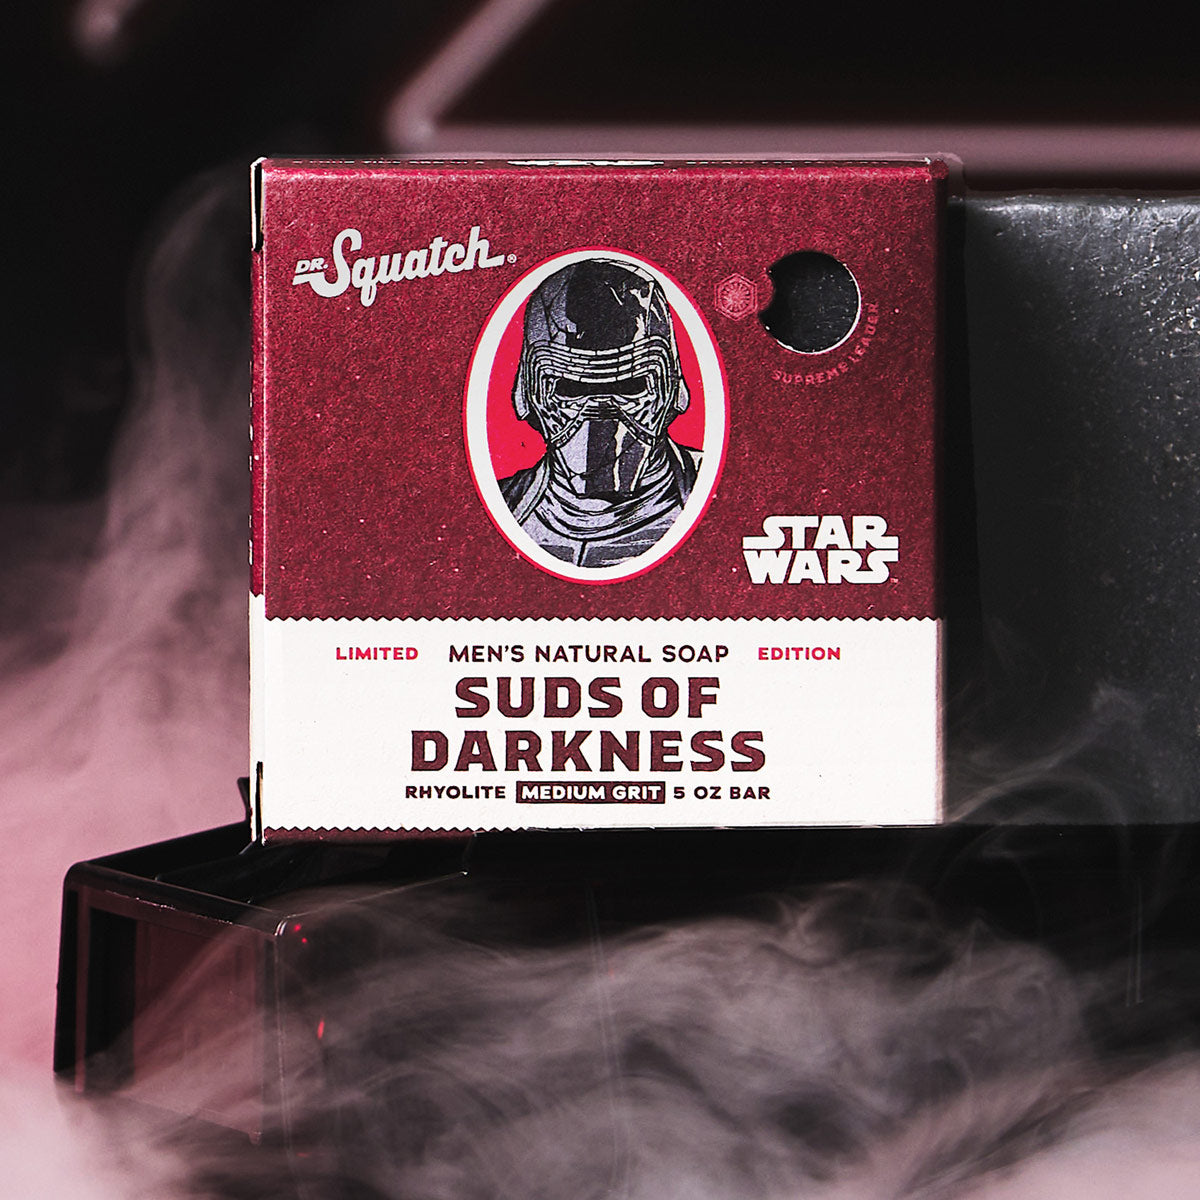 Sci-Fi-Inspired Soap Collections : Dr. Squatch Star Wars Soap Collection